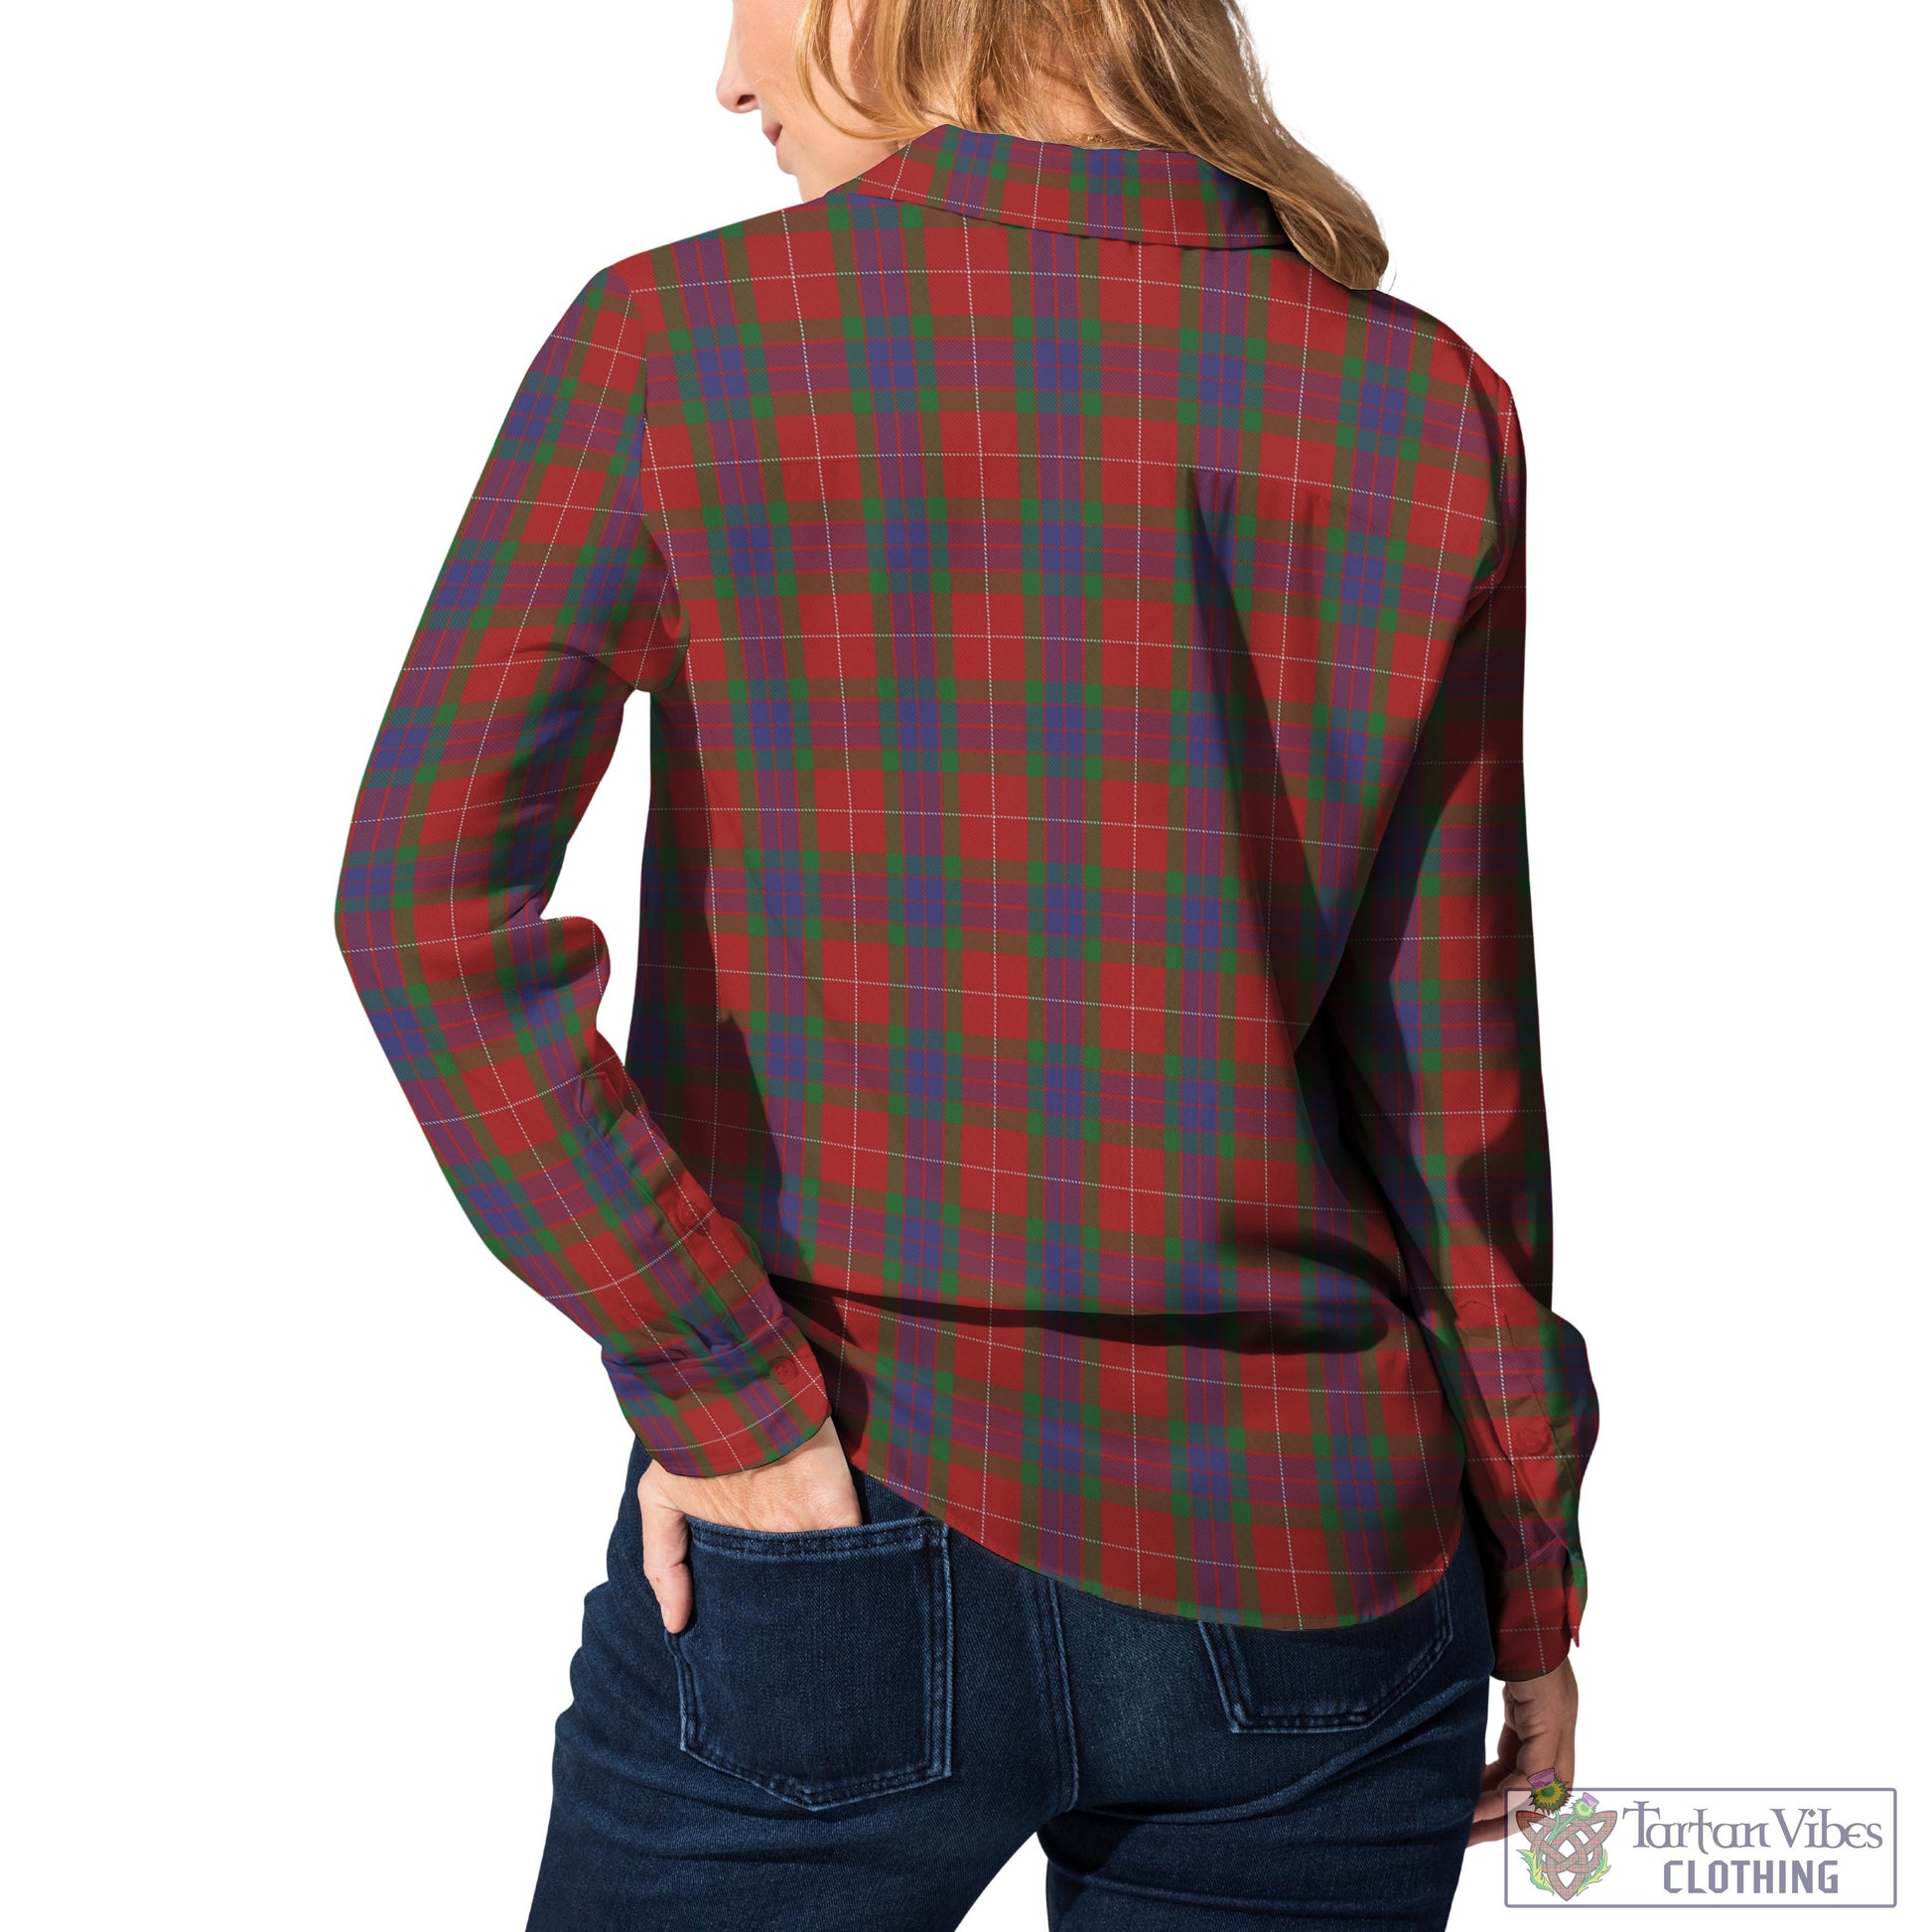 Tartan Vibes Clothing Fraser Tartan Womens Casual Shirt with Family Crest